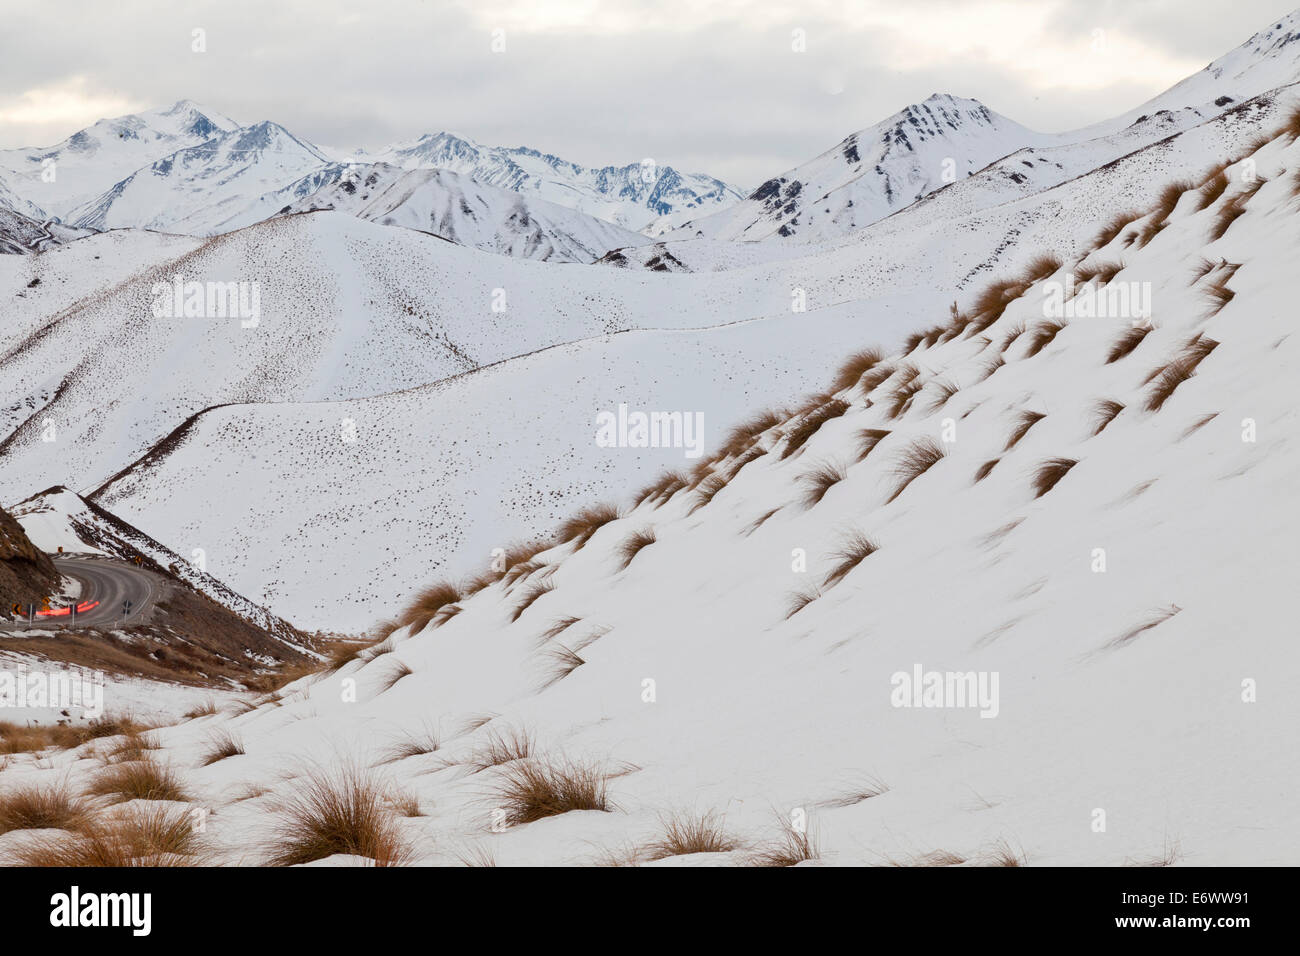 Tussock grass in snow, mountain scenery, Lindis Pass, Otago, South Island, New Zealand Stock Photo